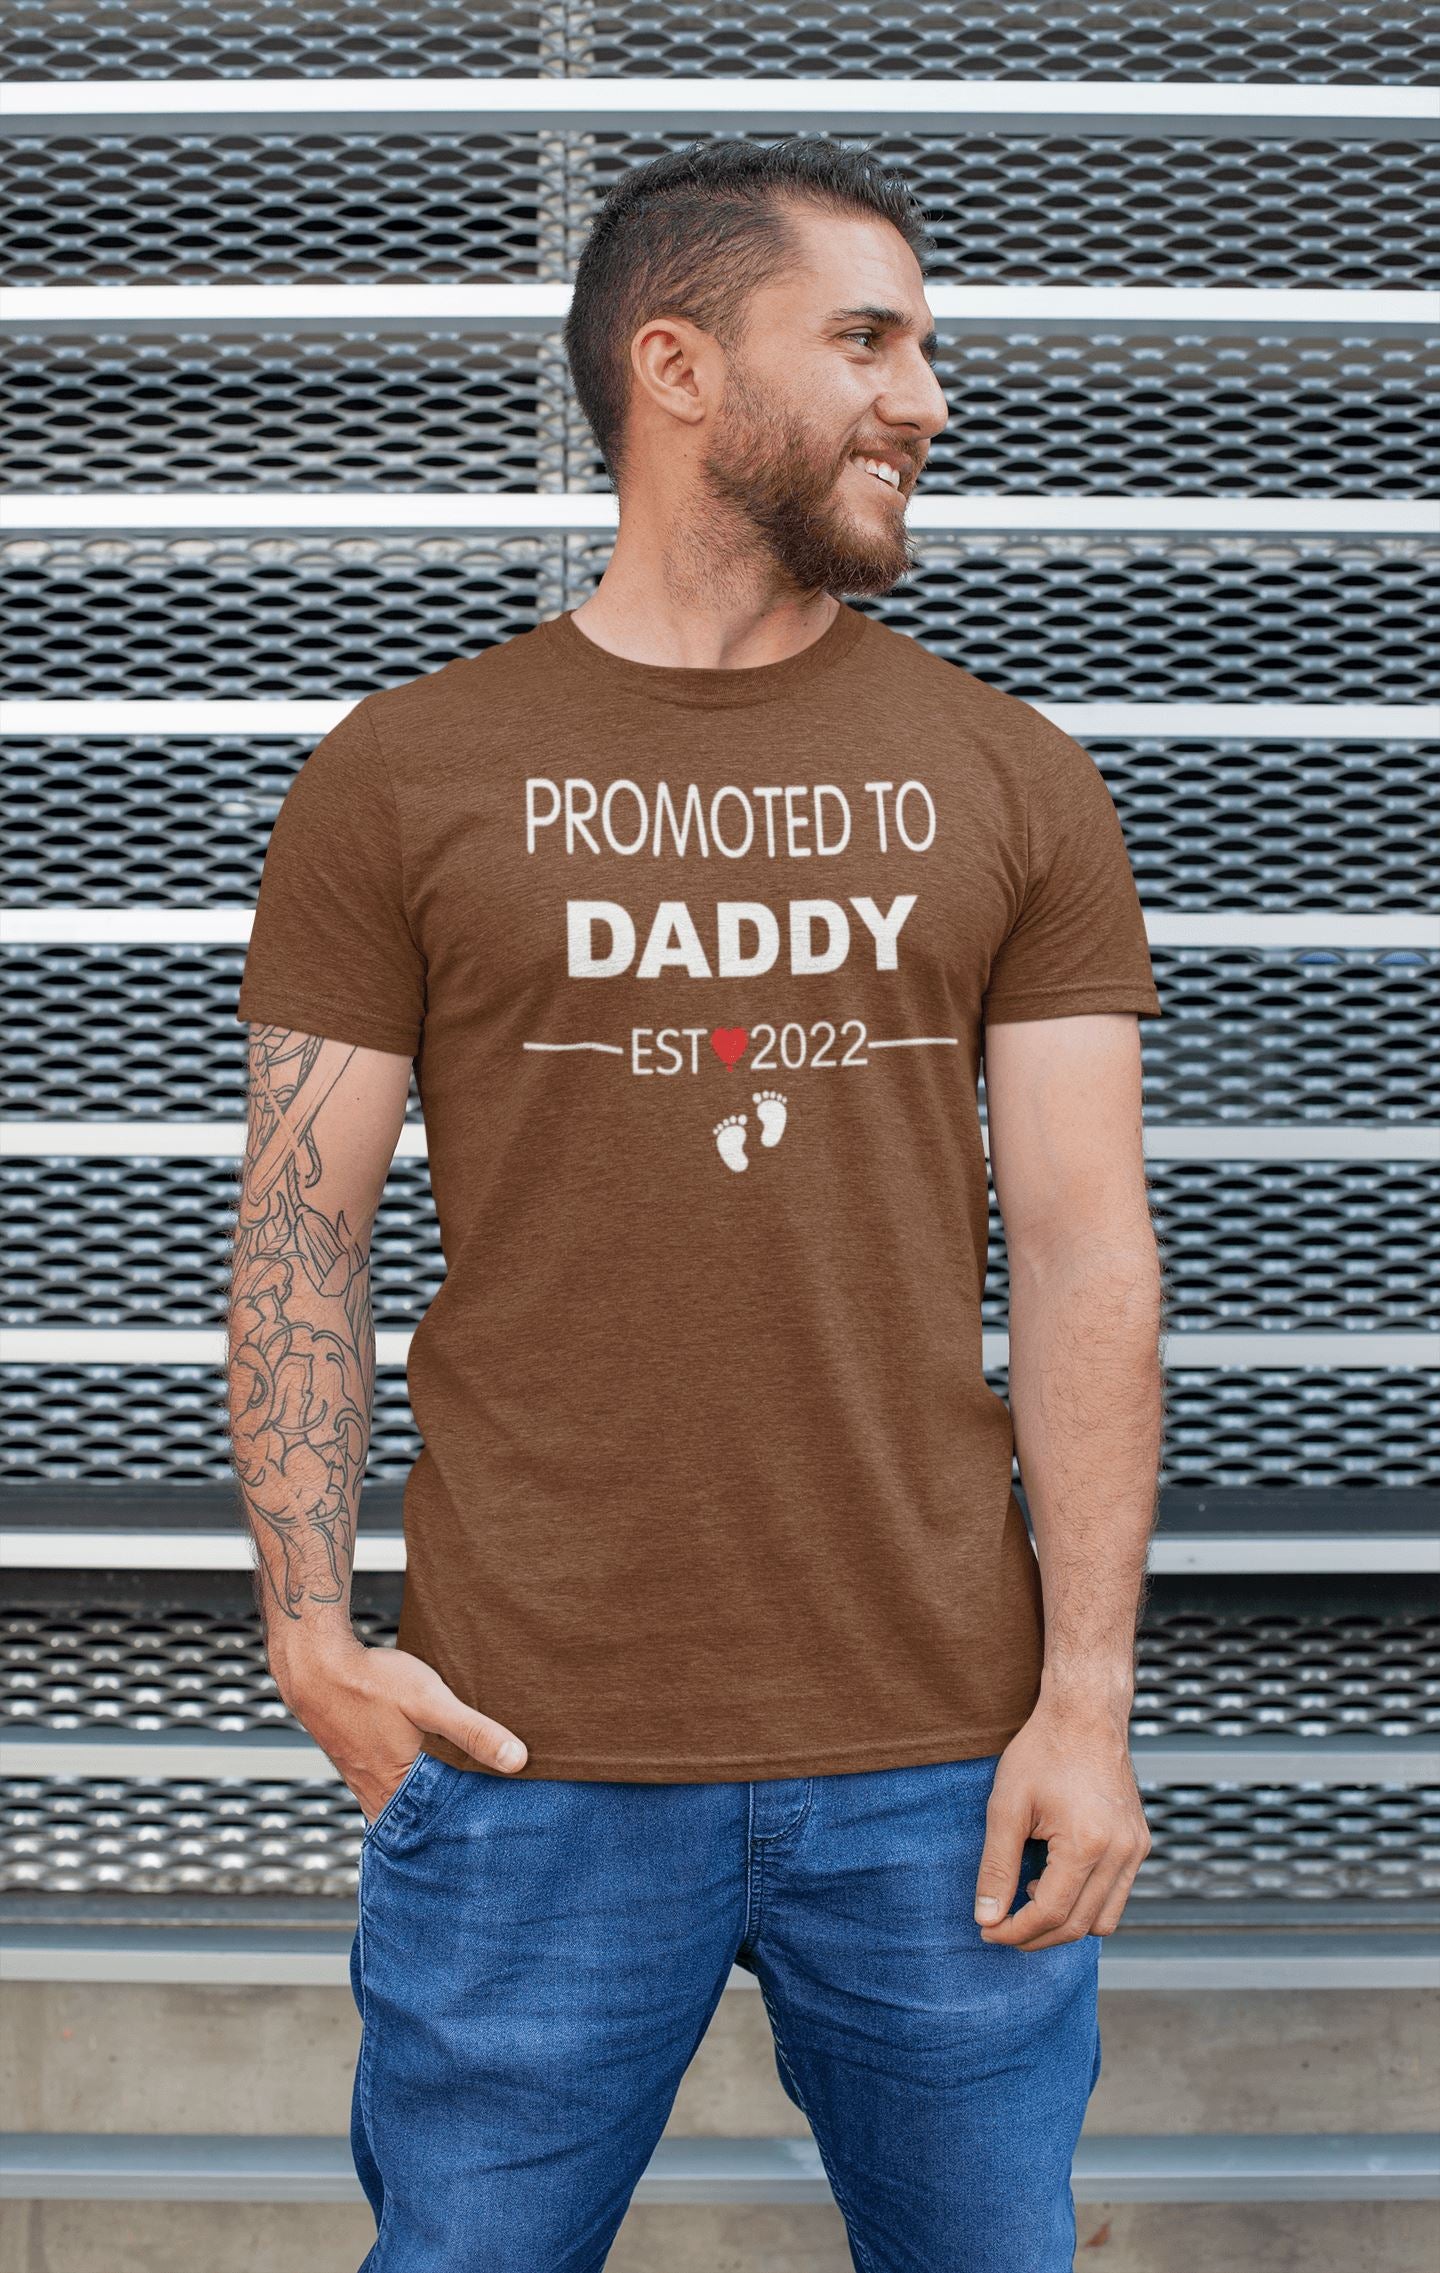 Promoted to Daddy Est. 2022 Exclusive T Shirt for Men - Catch My Drift India  black, clothing, dad, father, made in india, mom, parents, shirt, t shirt, tshirt